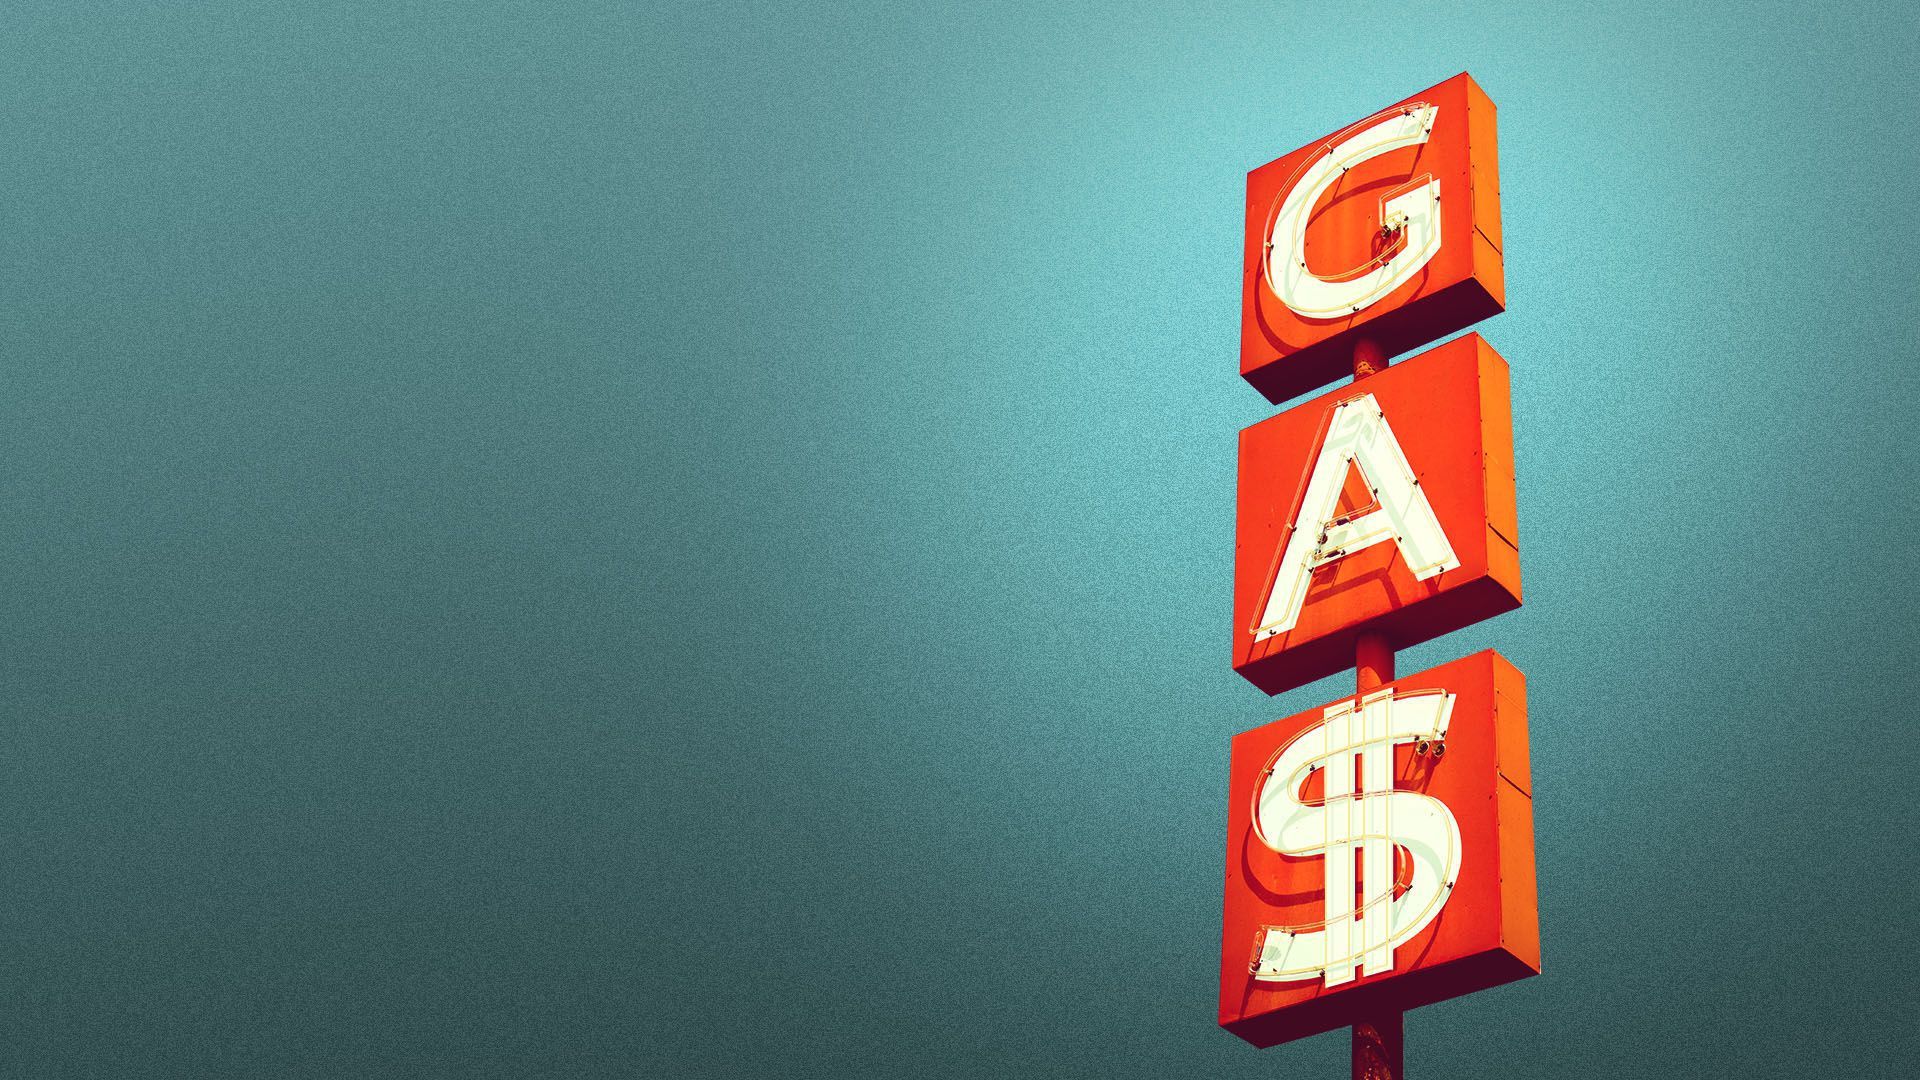 An old fashioned "gas" sign, with a dollar sign instead of an "s."